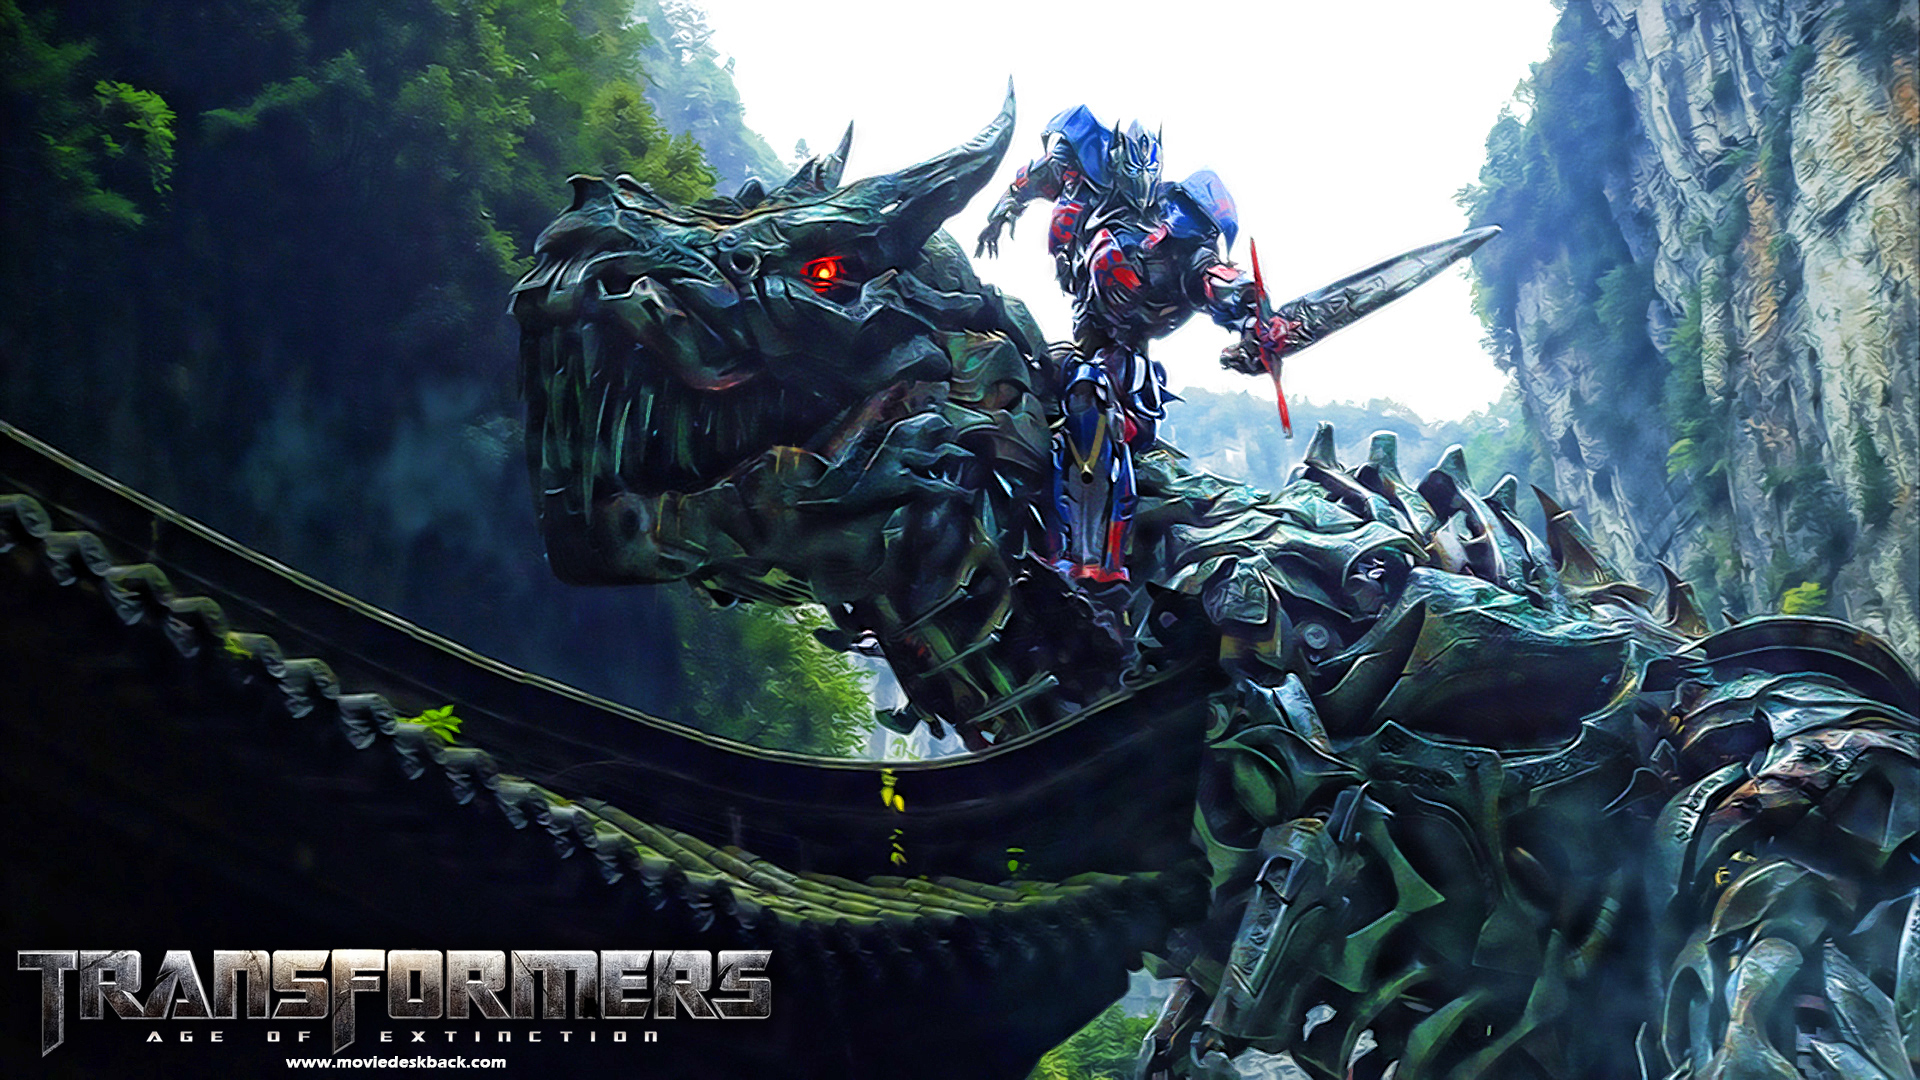 Episode 49: Transformers Age of Extinction